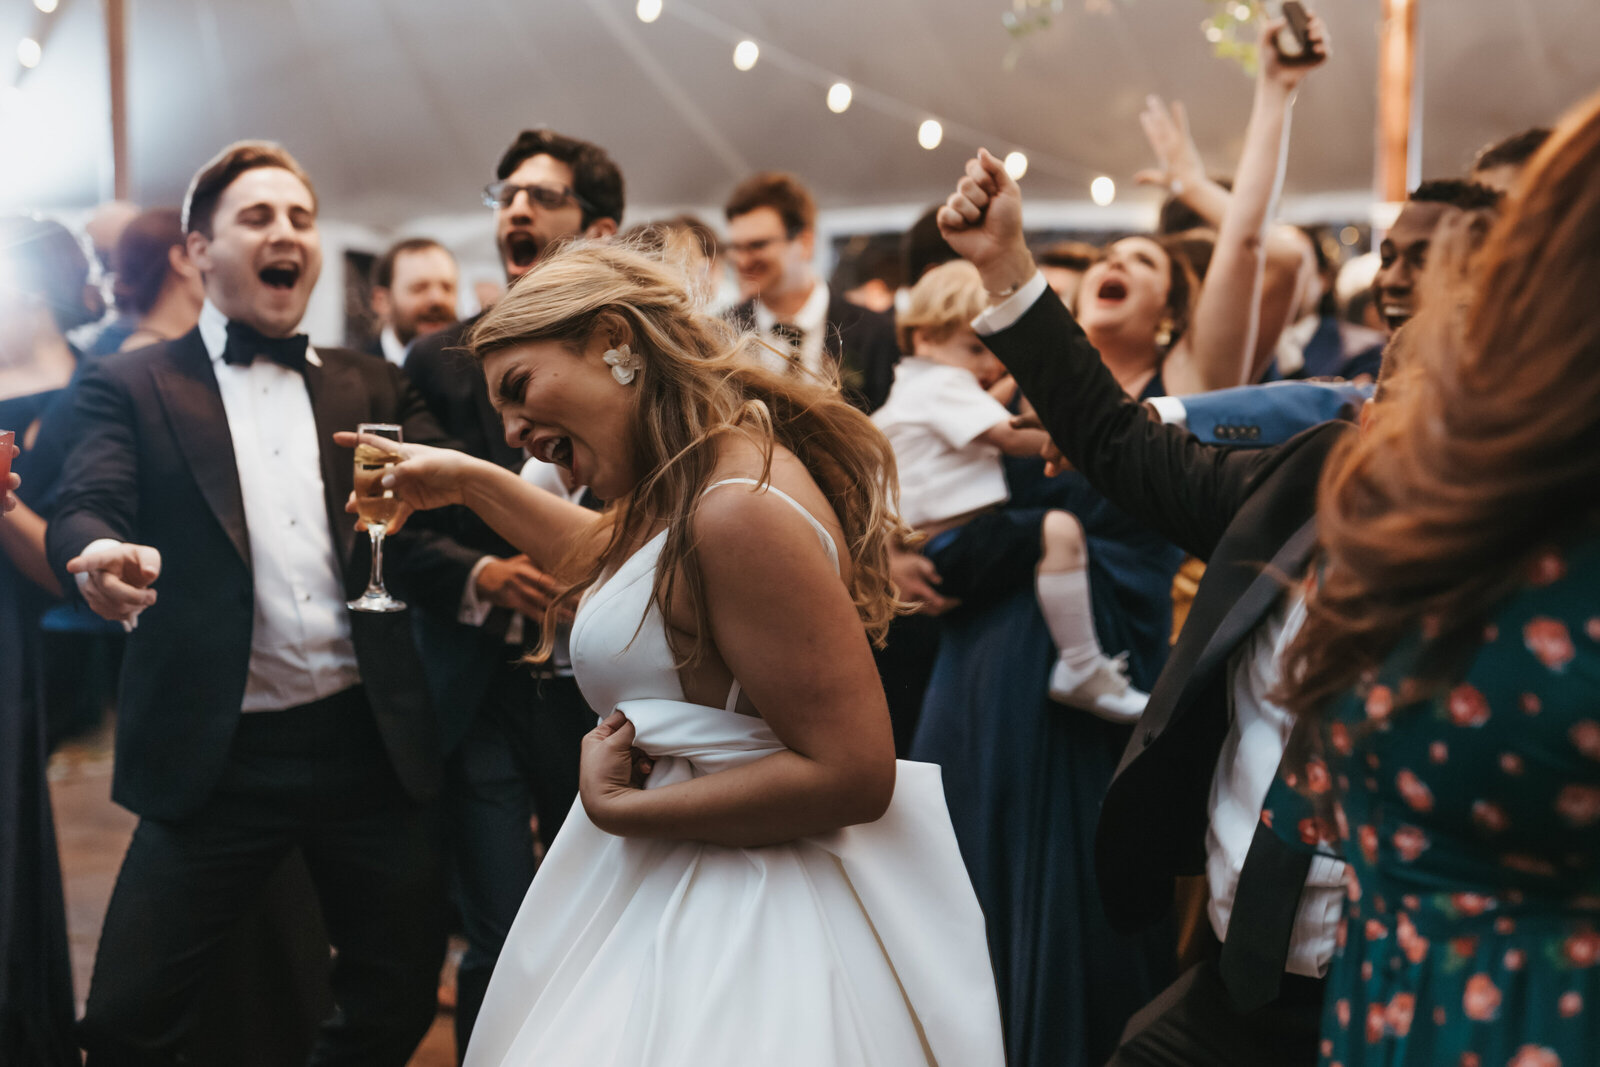 A bride dances with her friends during a wedding reception